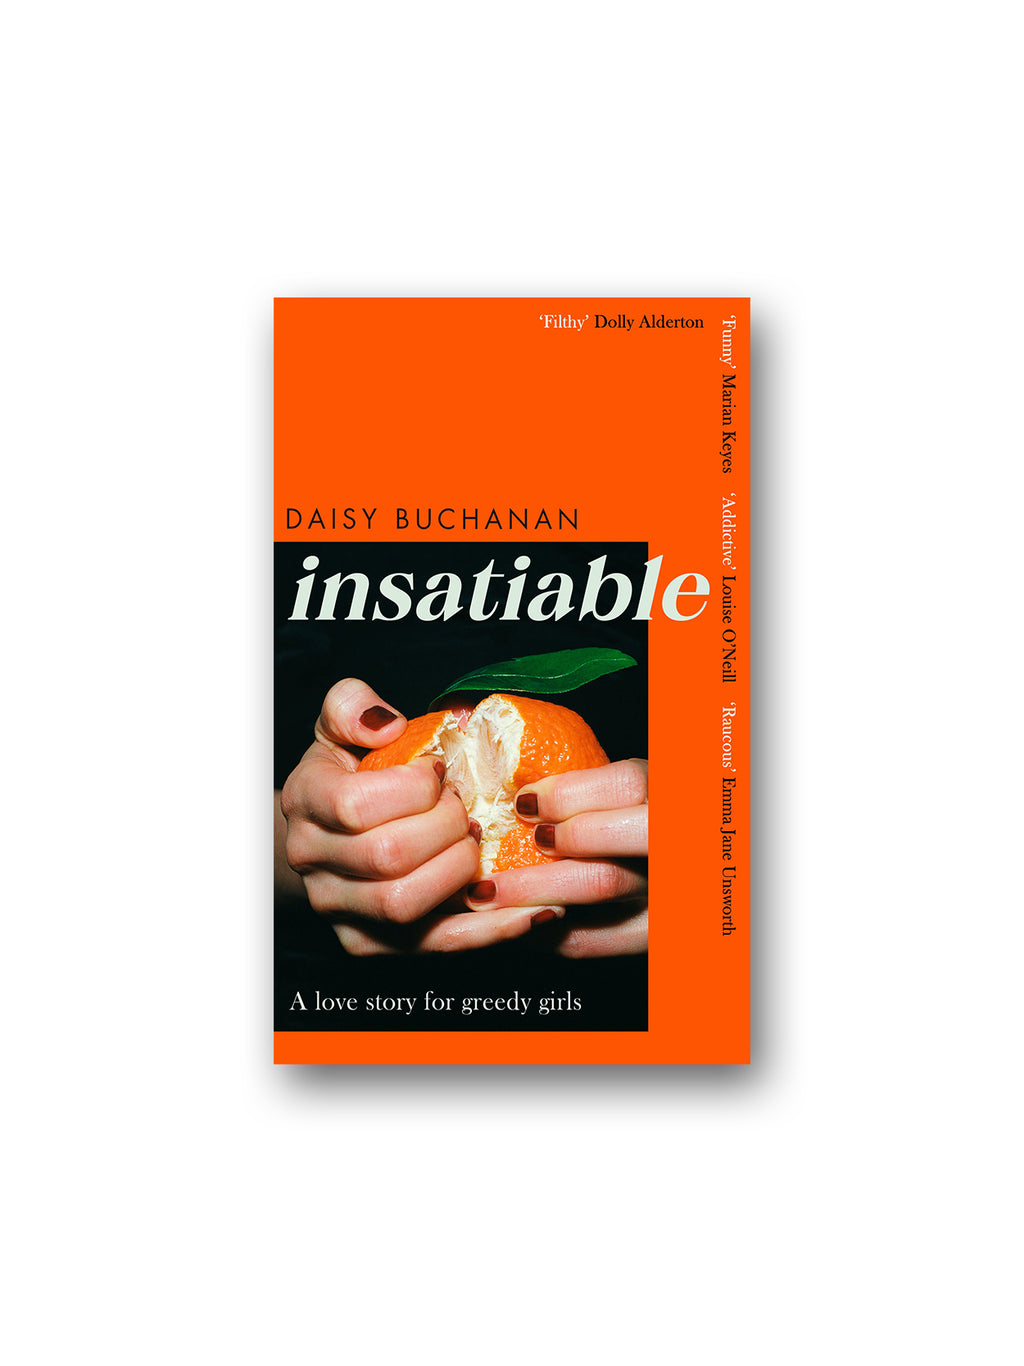 Insatiable : 'A frank, funny account of 21st-century lust' Independent